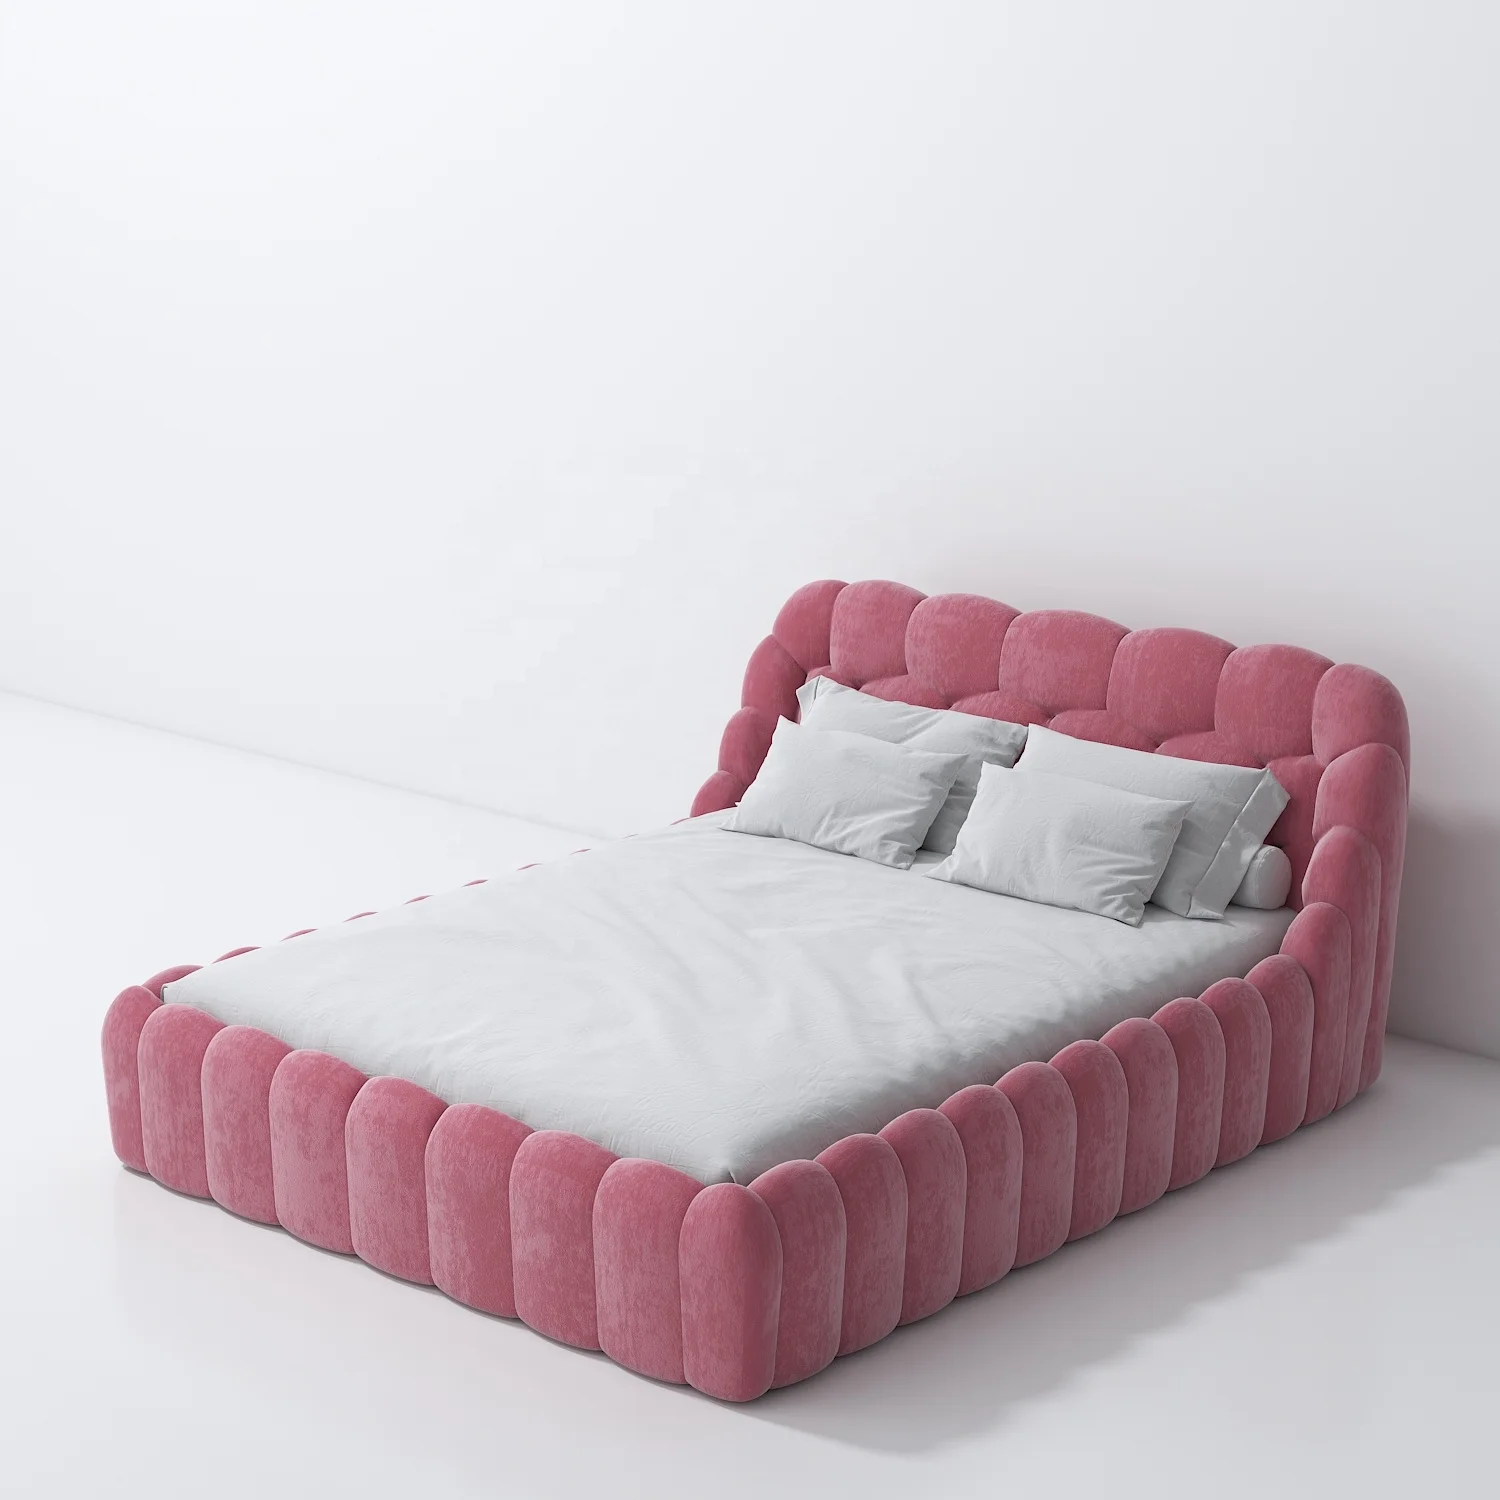 

VASAGLE Pink Princess Bedroom Furniture strong and Durable beds Full/Queen Size customized fabric upholster bed frame